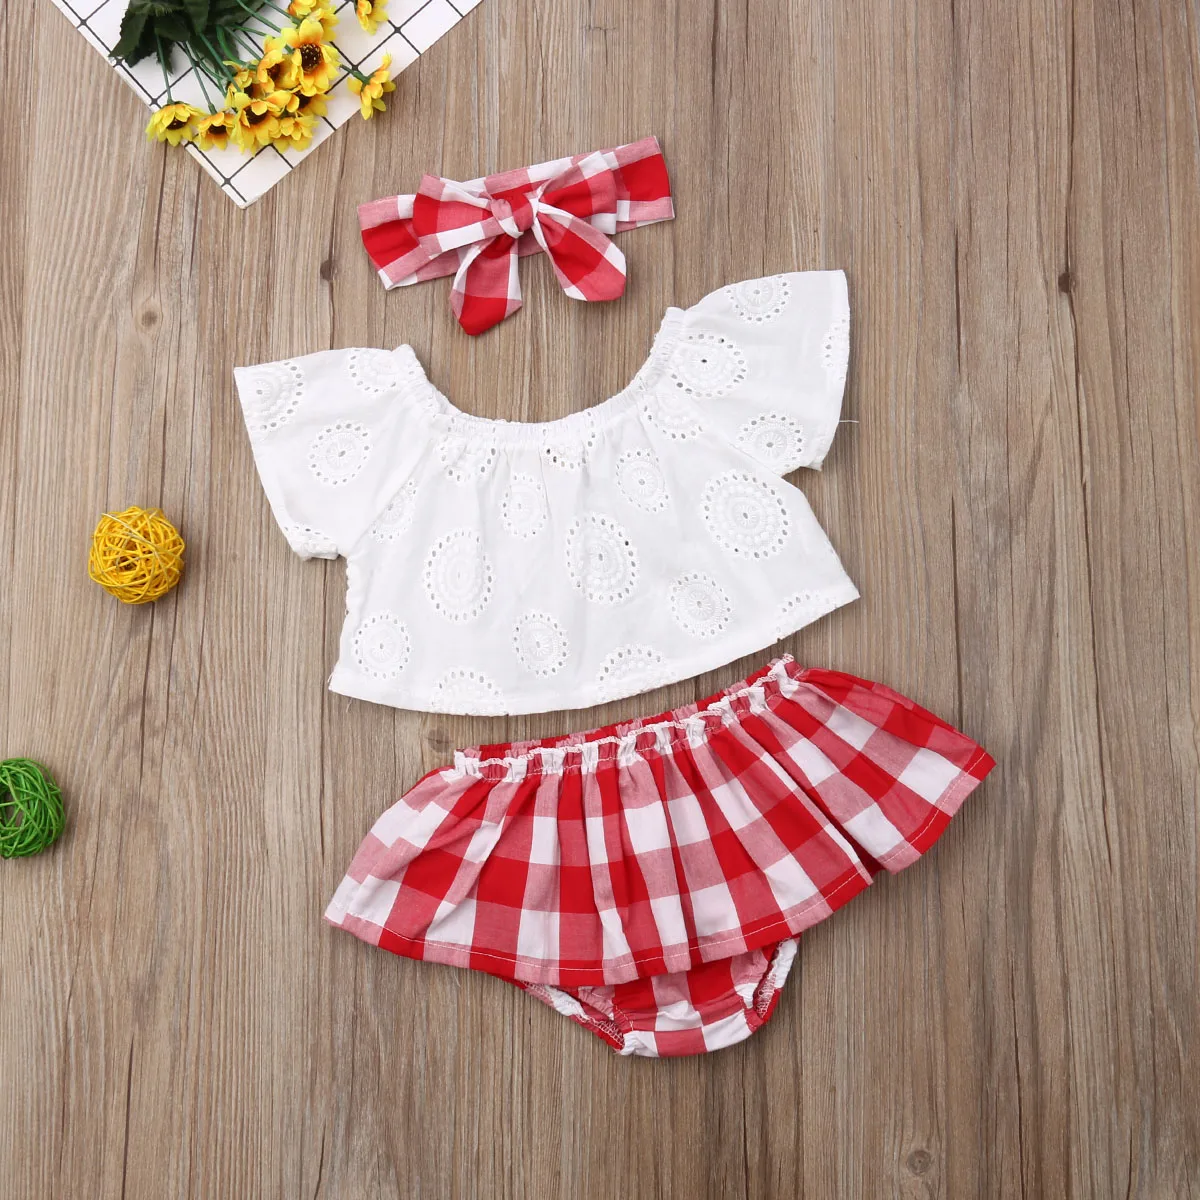 best Baby Clothing Set 0-24M 3pcs Baby Girls Clothes Set Solid White Off Shoulder Shirt Tops Red Plaid Skirts Girls Hairband Kids Set Baby Girl Outfits Baby Clothing Set luxury